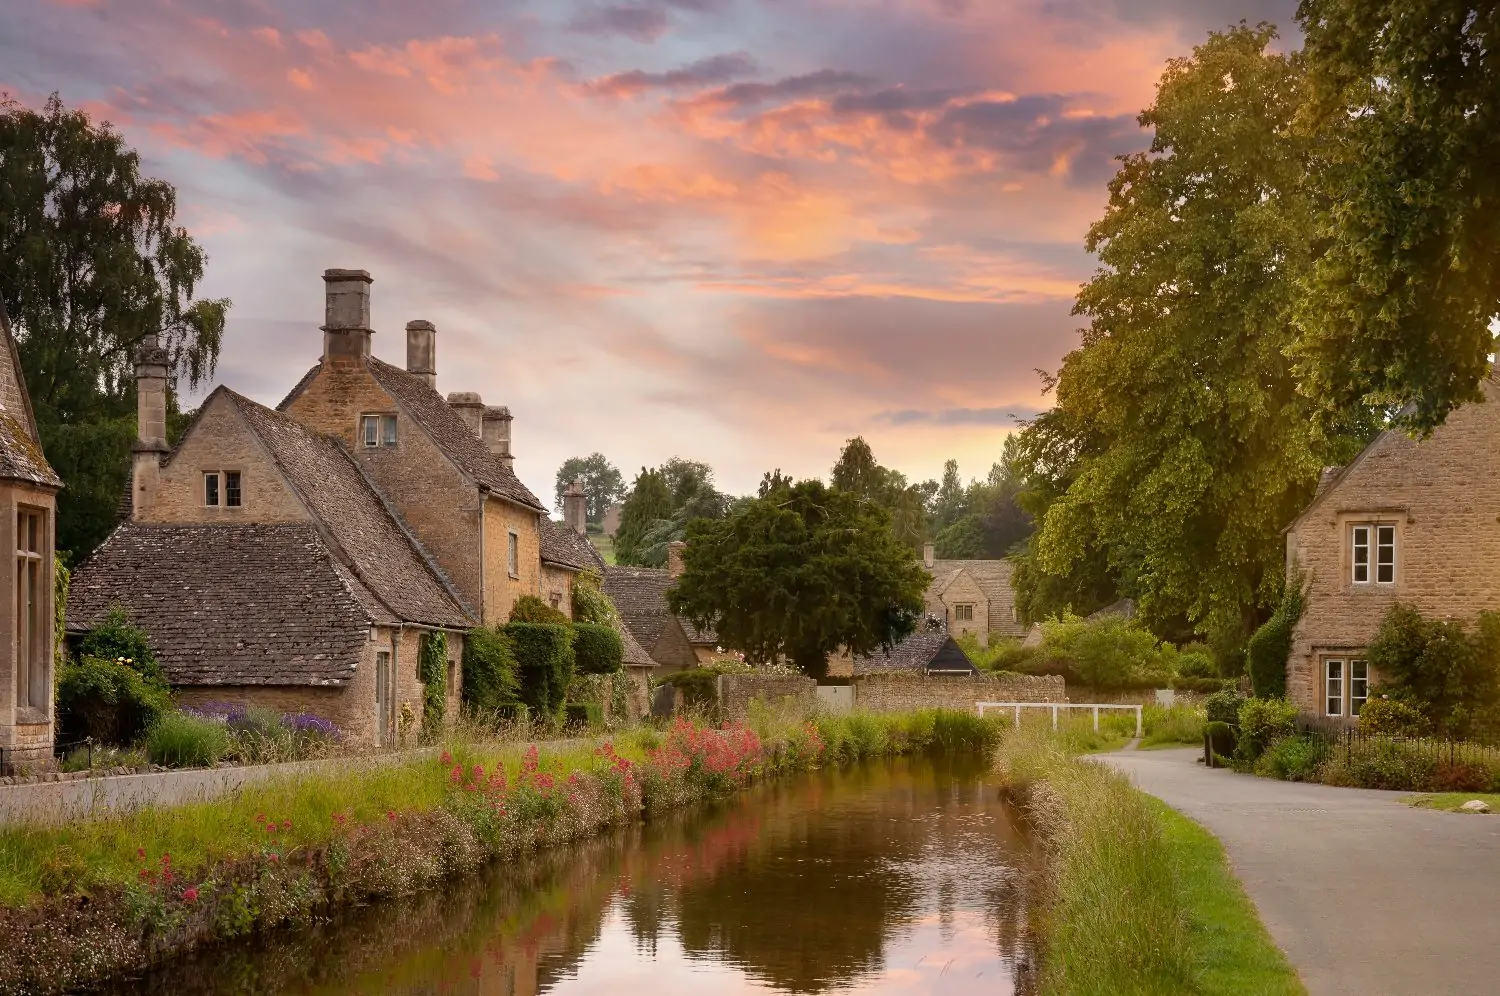 The pretty village of Lower Slaughter